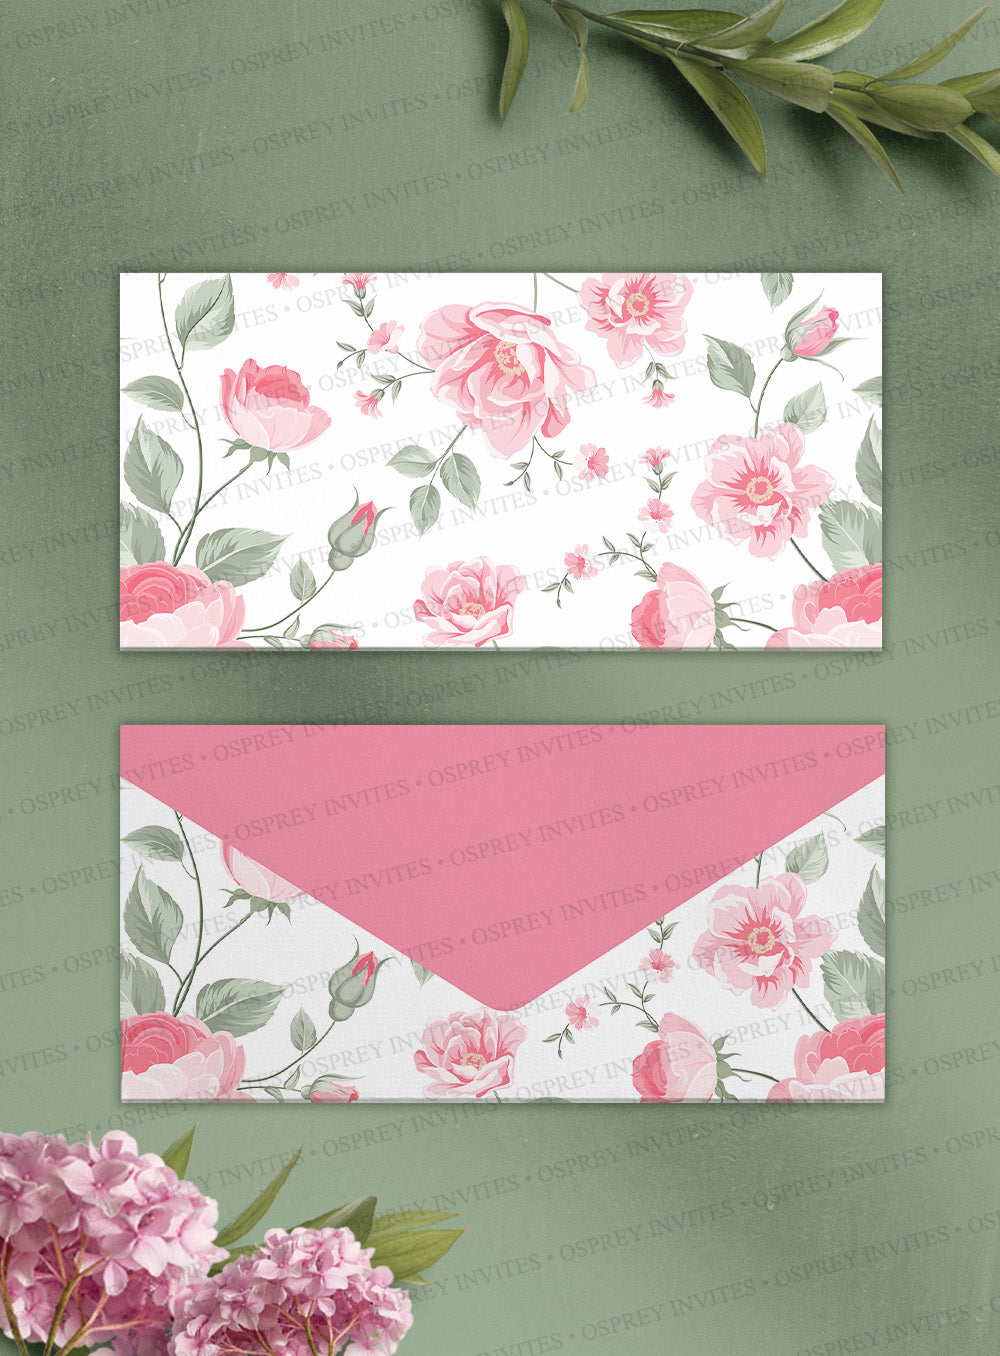 Money envelope design with a floral pink rose design is a must-have item in your wedding stationery suite.